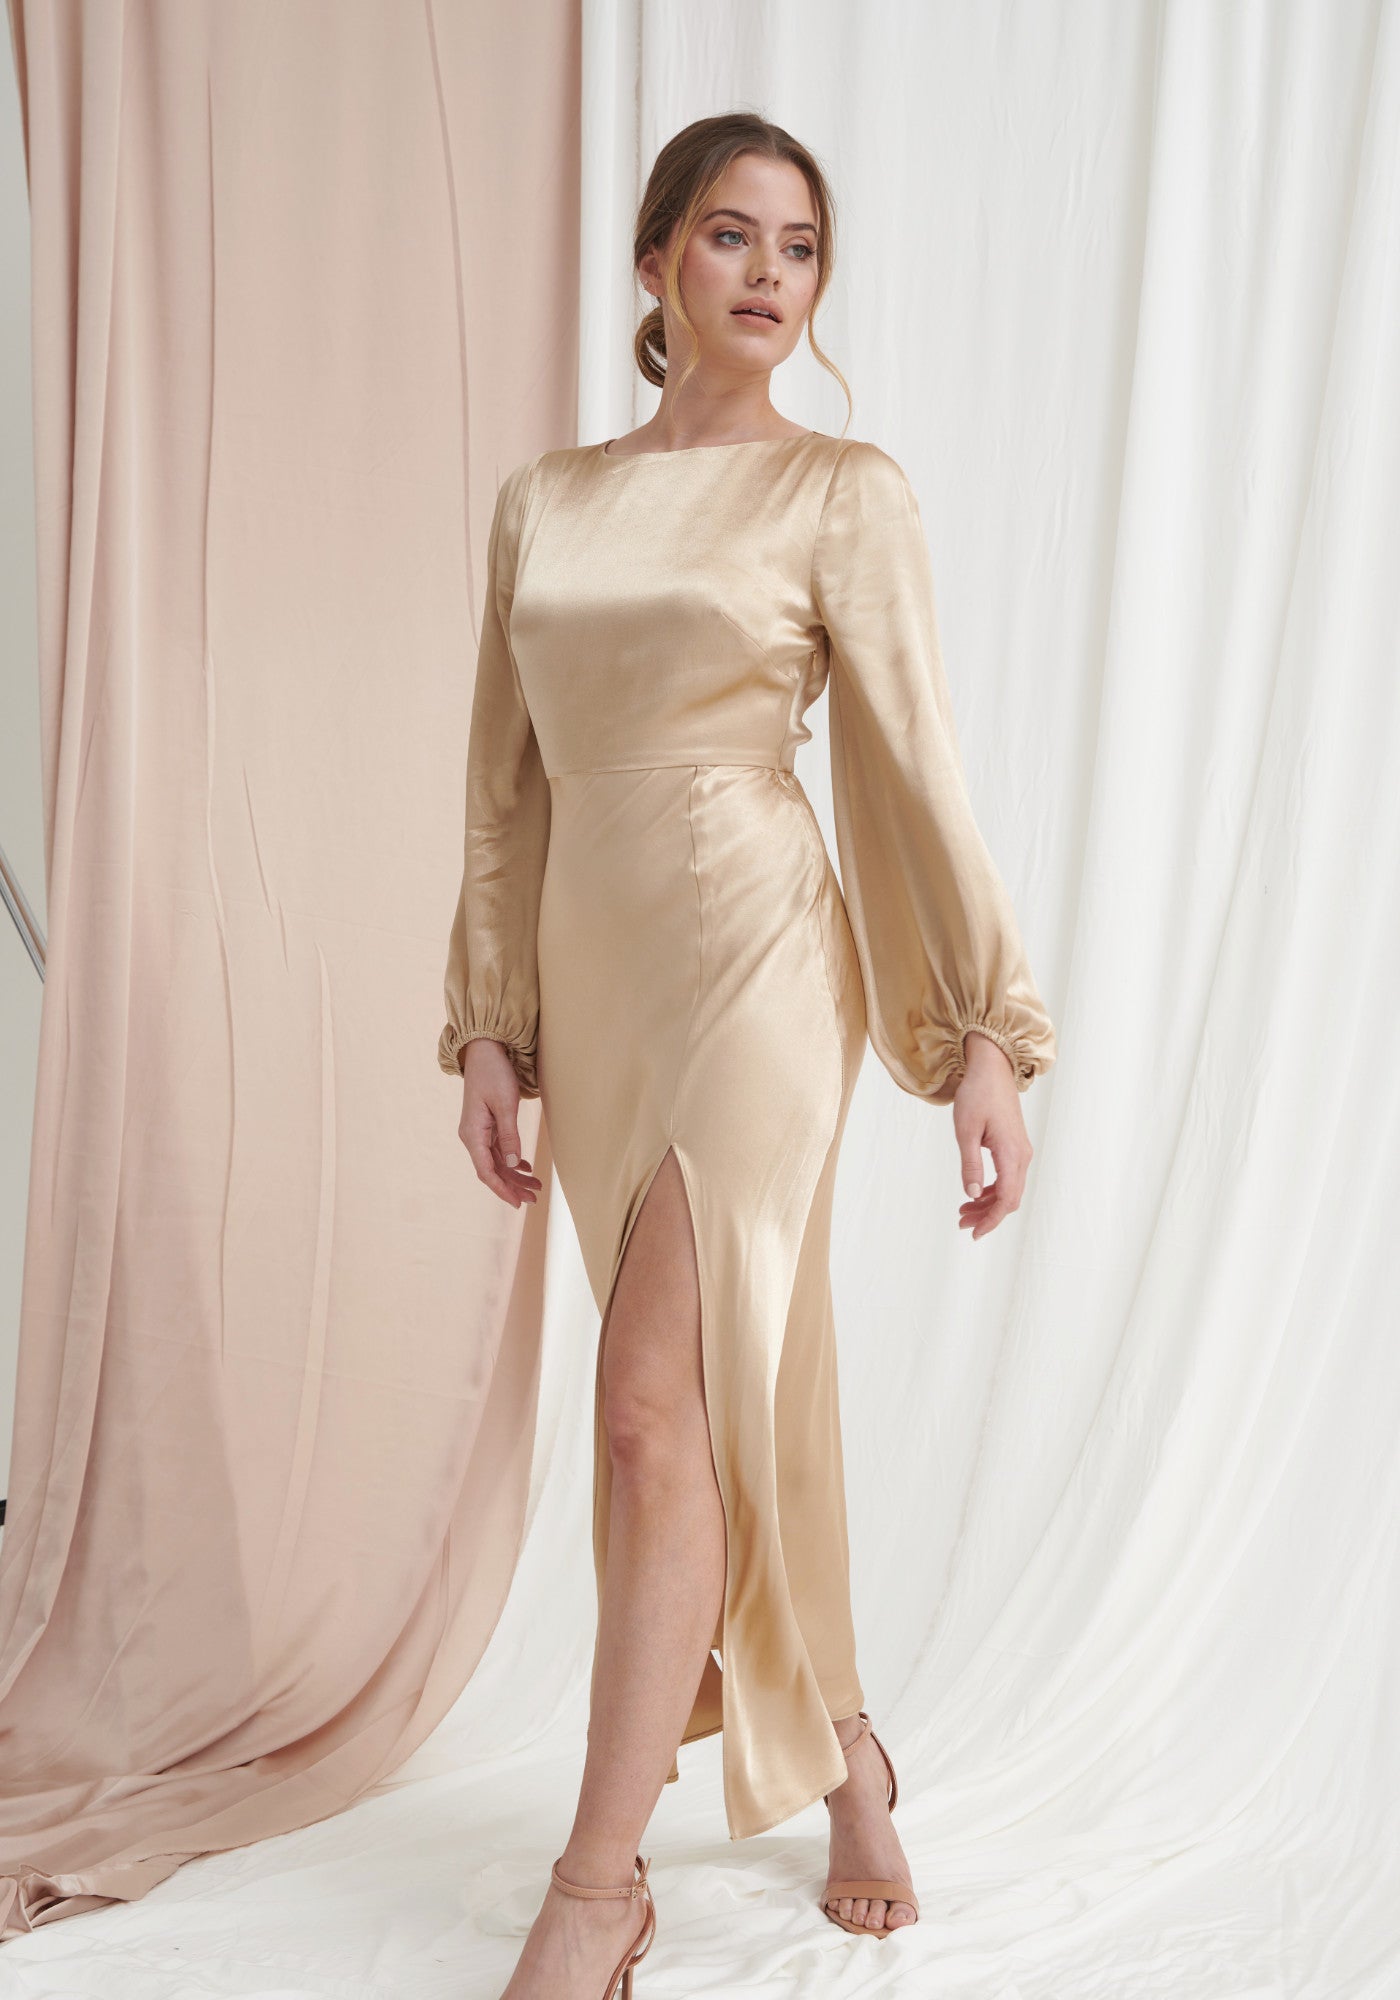 satin dress with sleeves